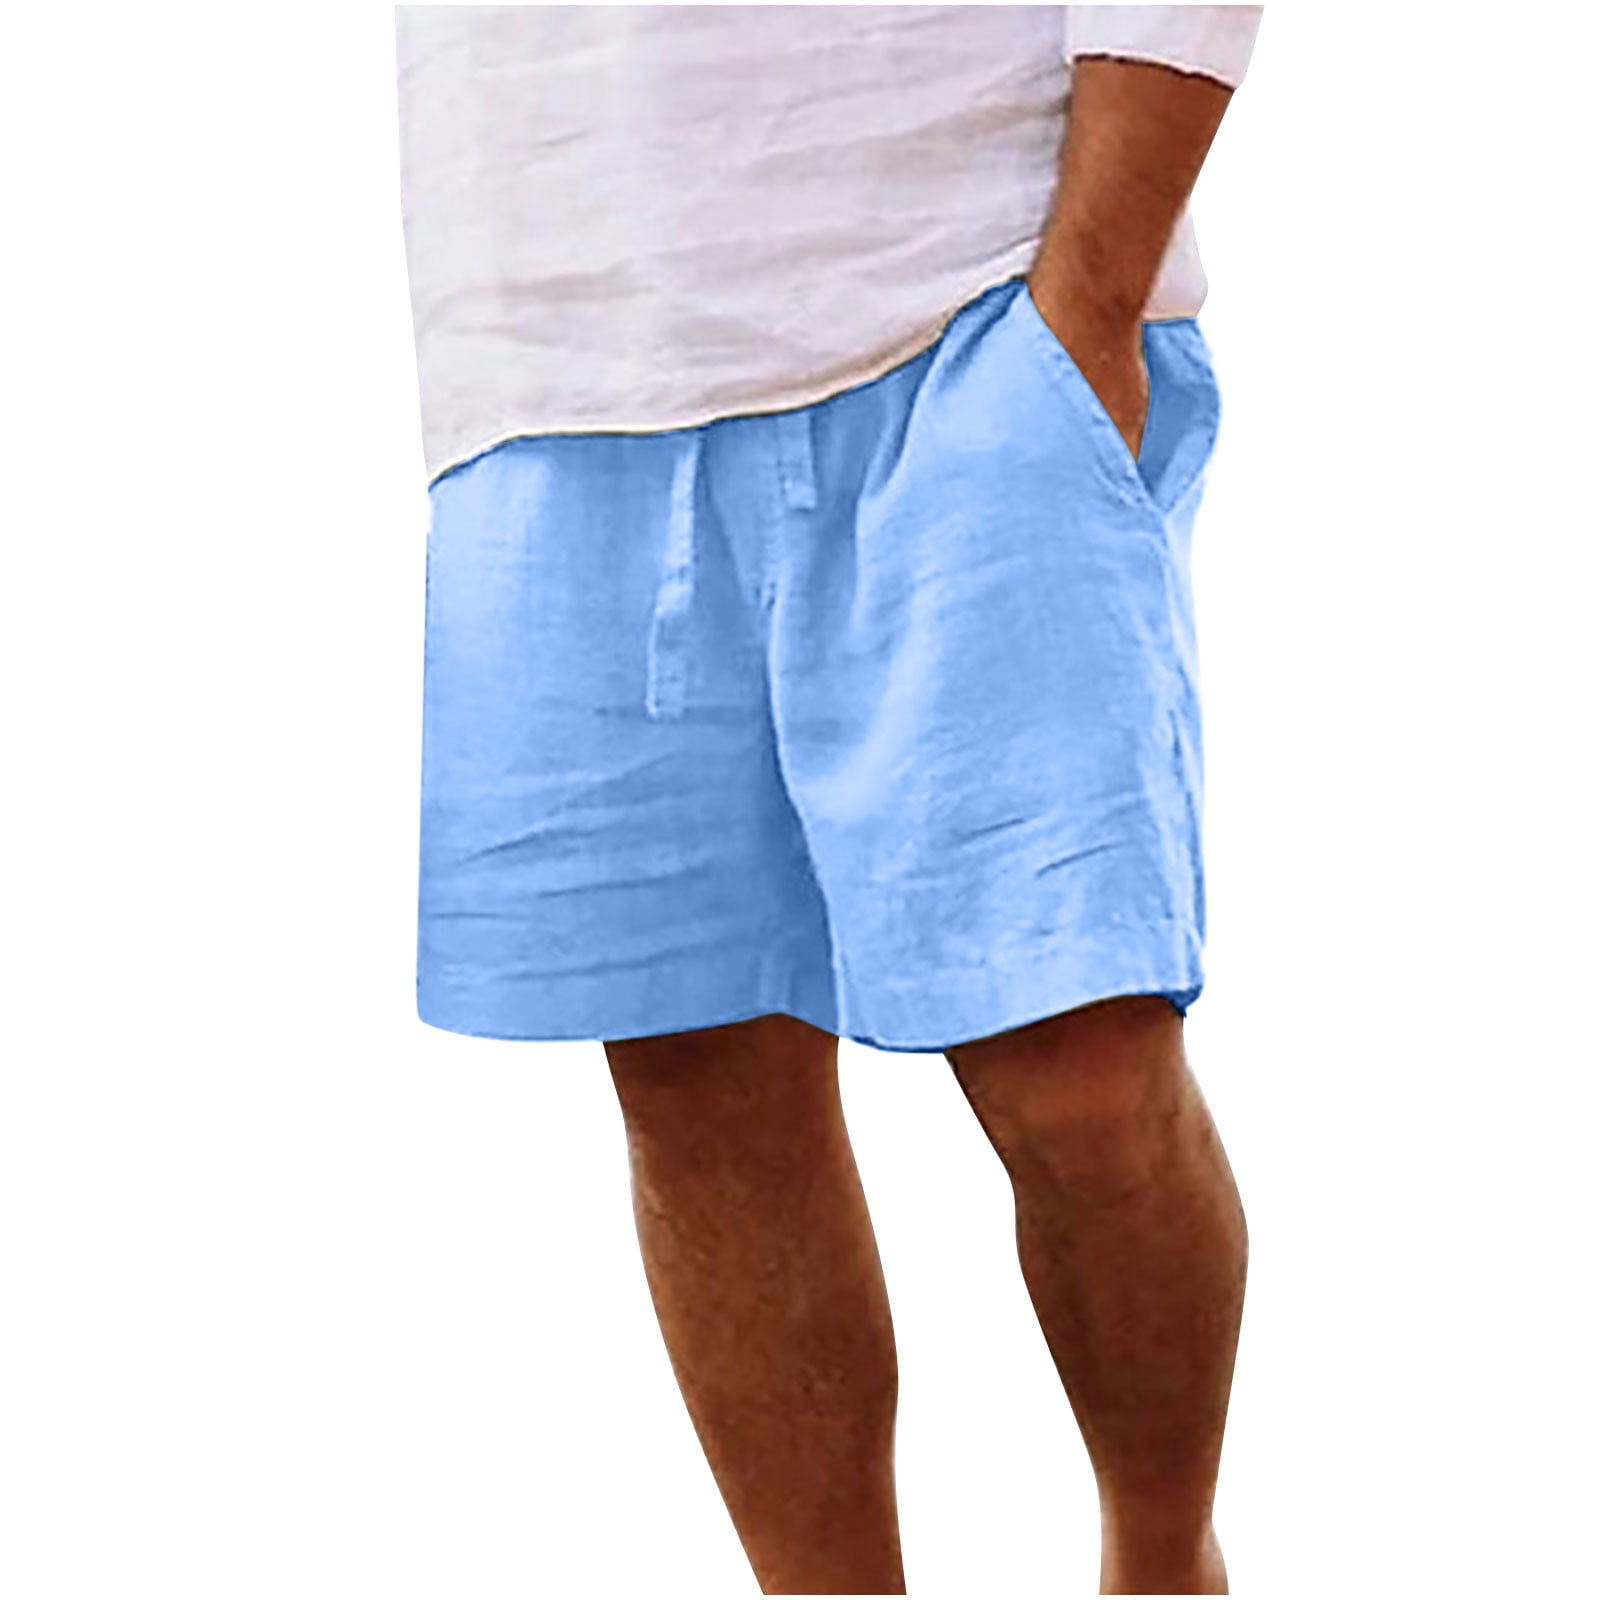 Buy Shorts for Men Half Pants | Kneeker | Gym & Training | Causal Wear |  Active Wear | Stripes in Design | Running | Jogging | Navy (XXL) at  Amazon.in